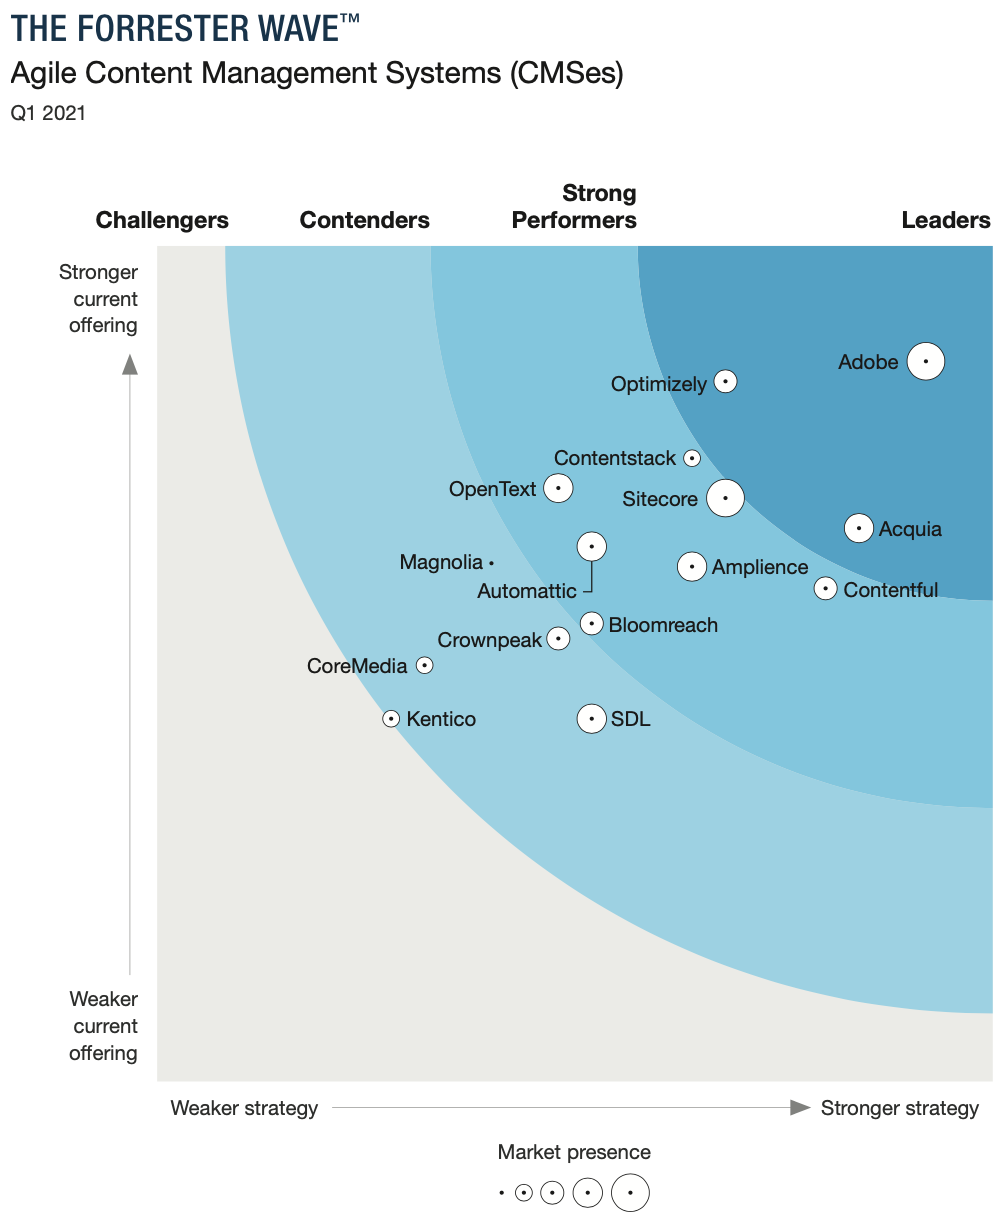 Acquia shown as a Leader together with Adobe and Optimizely.